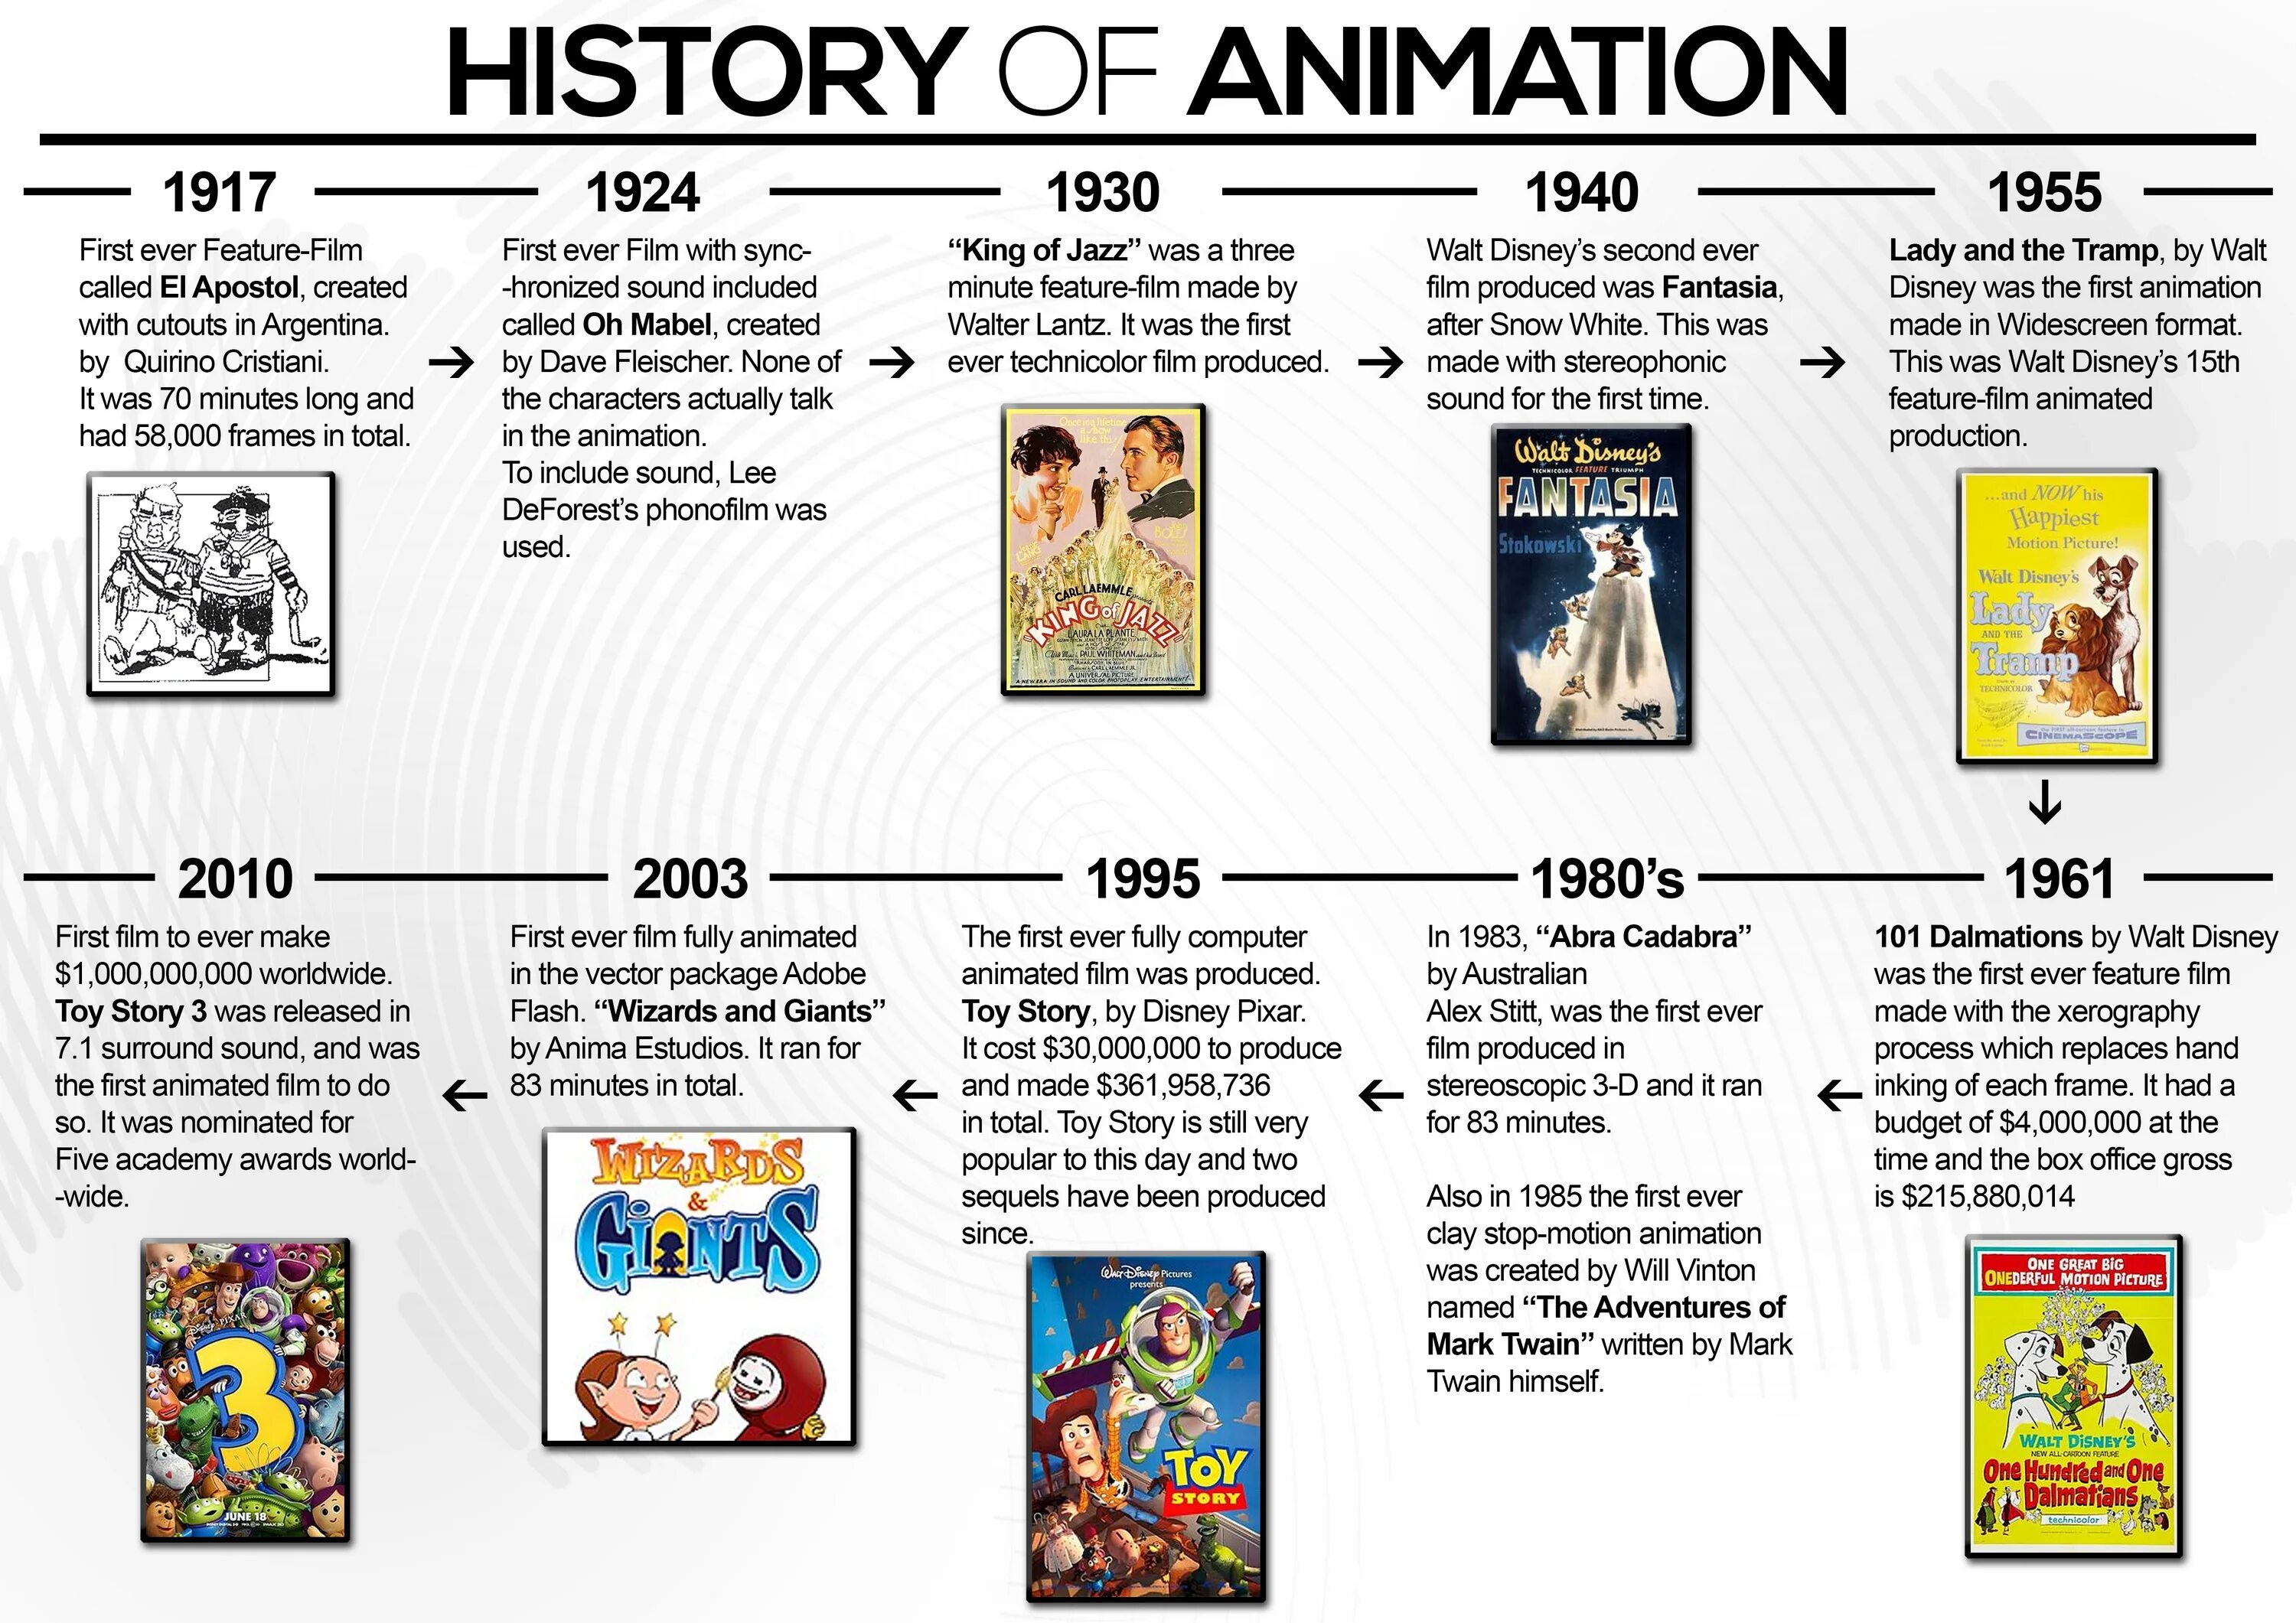 History of animation. History of movie презентация. History of animation текст. The History of animations 9 класс.